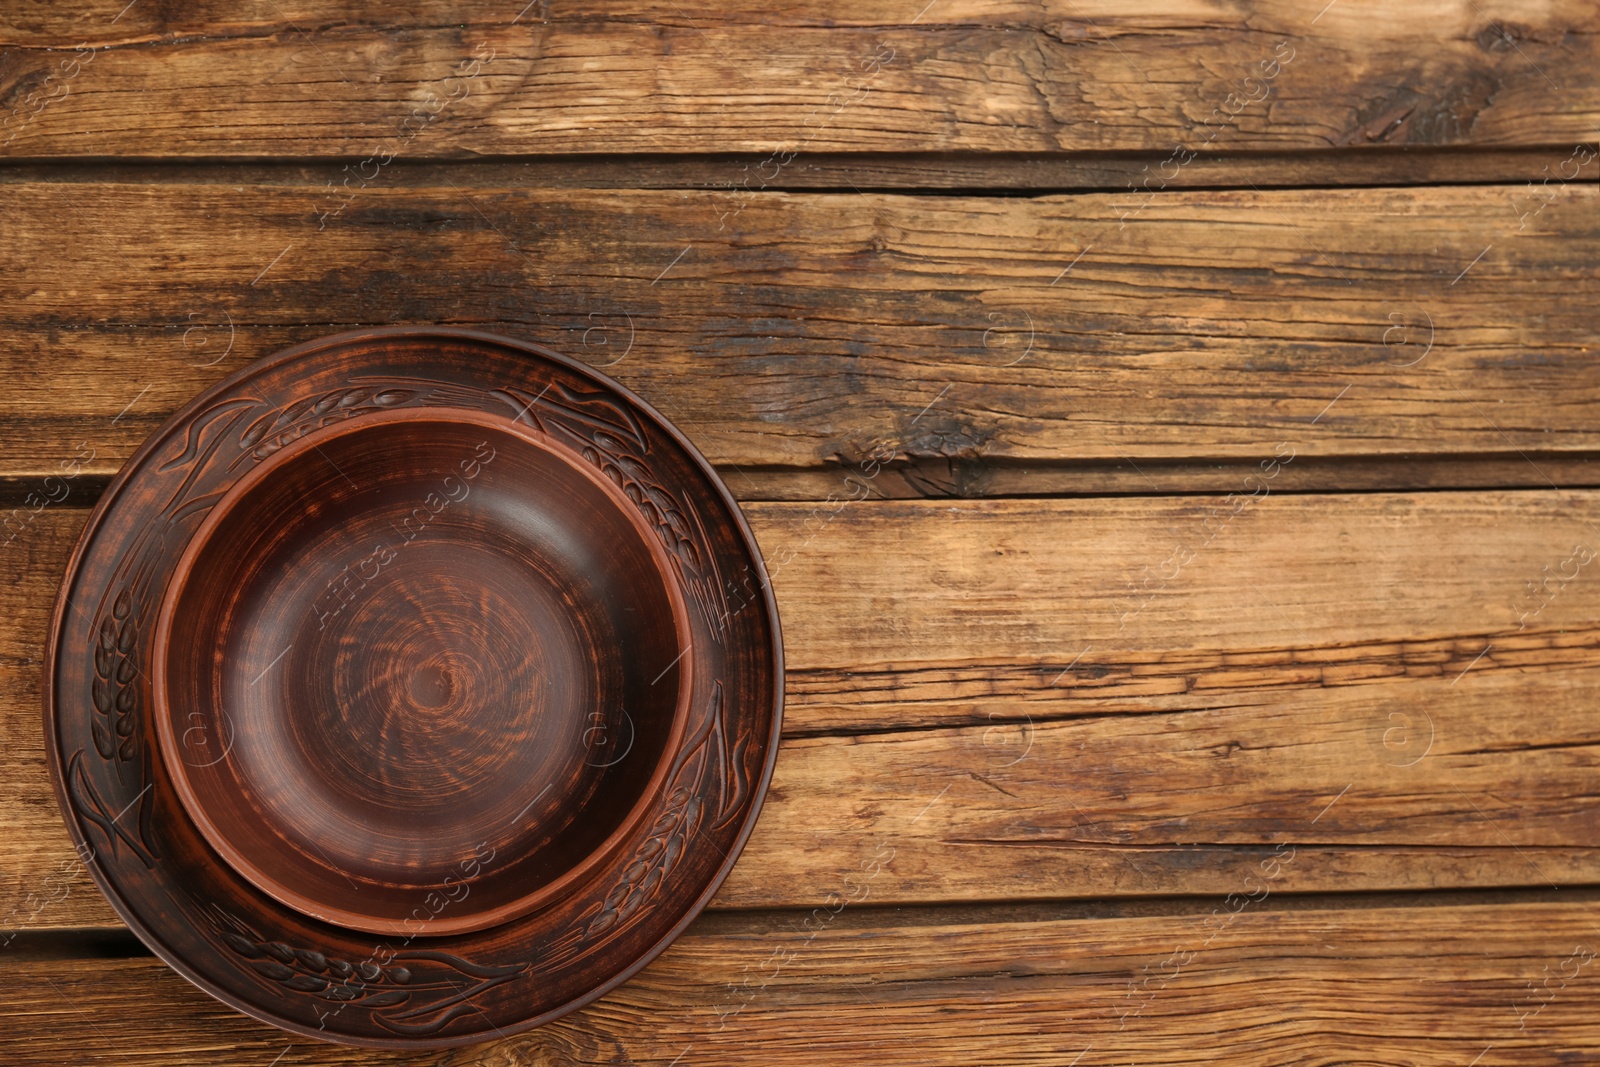 Photo of Clay plate and bowl on wooden table, top view with space for text. Handmade utensils